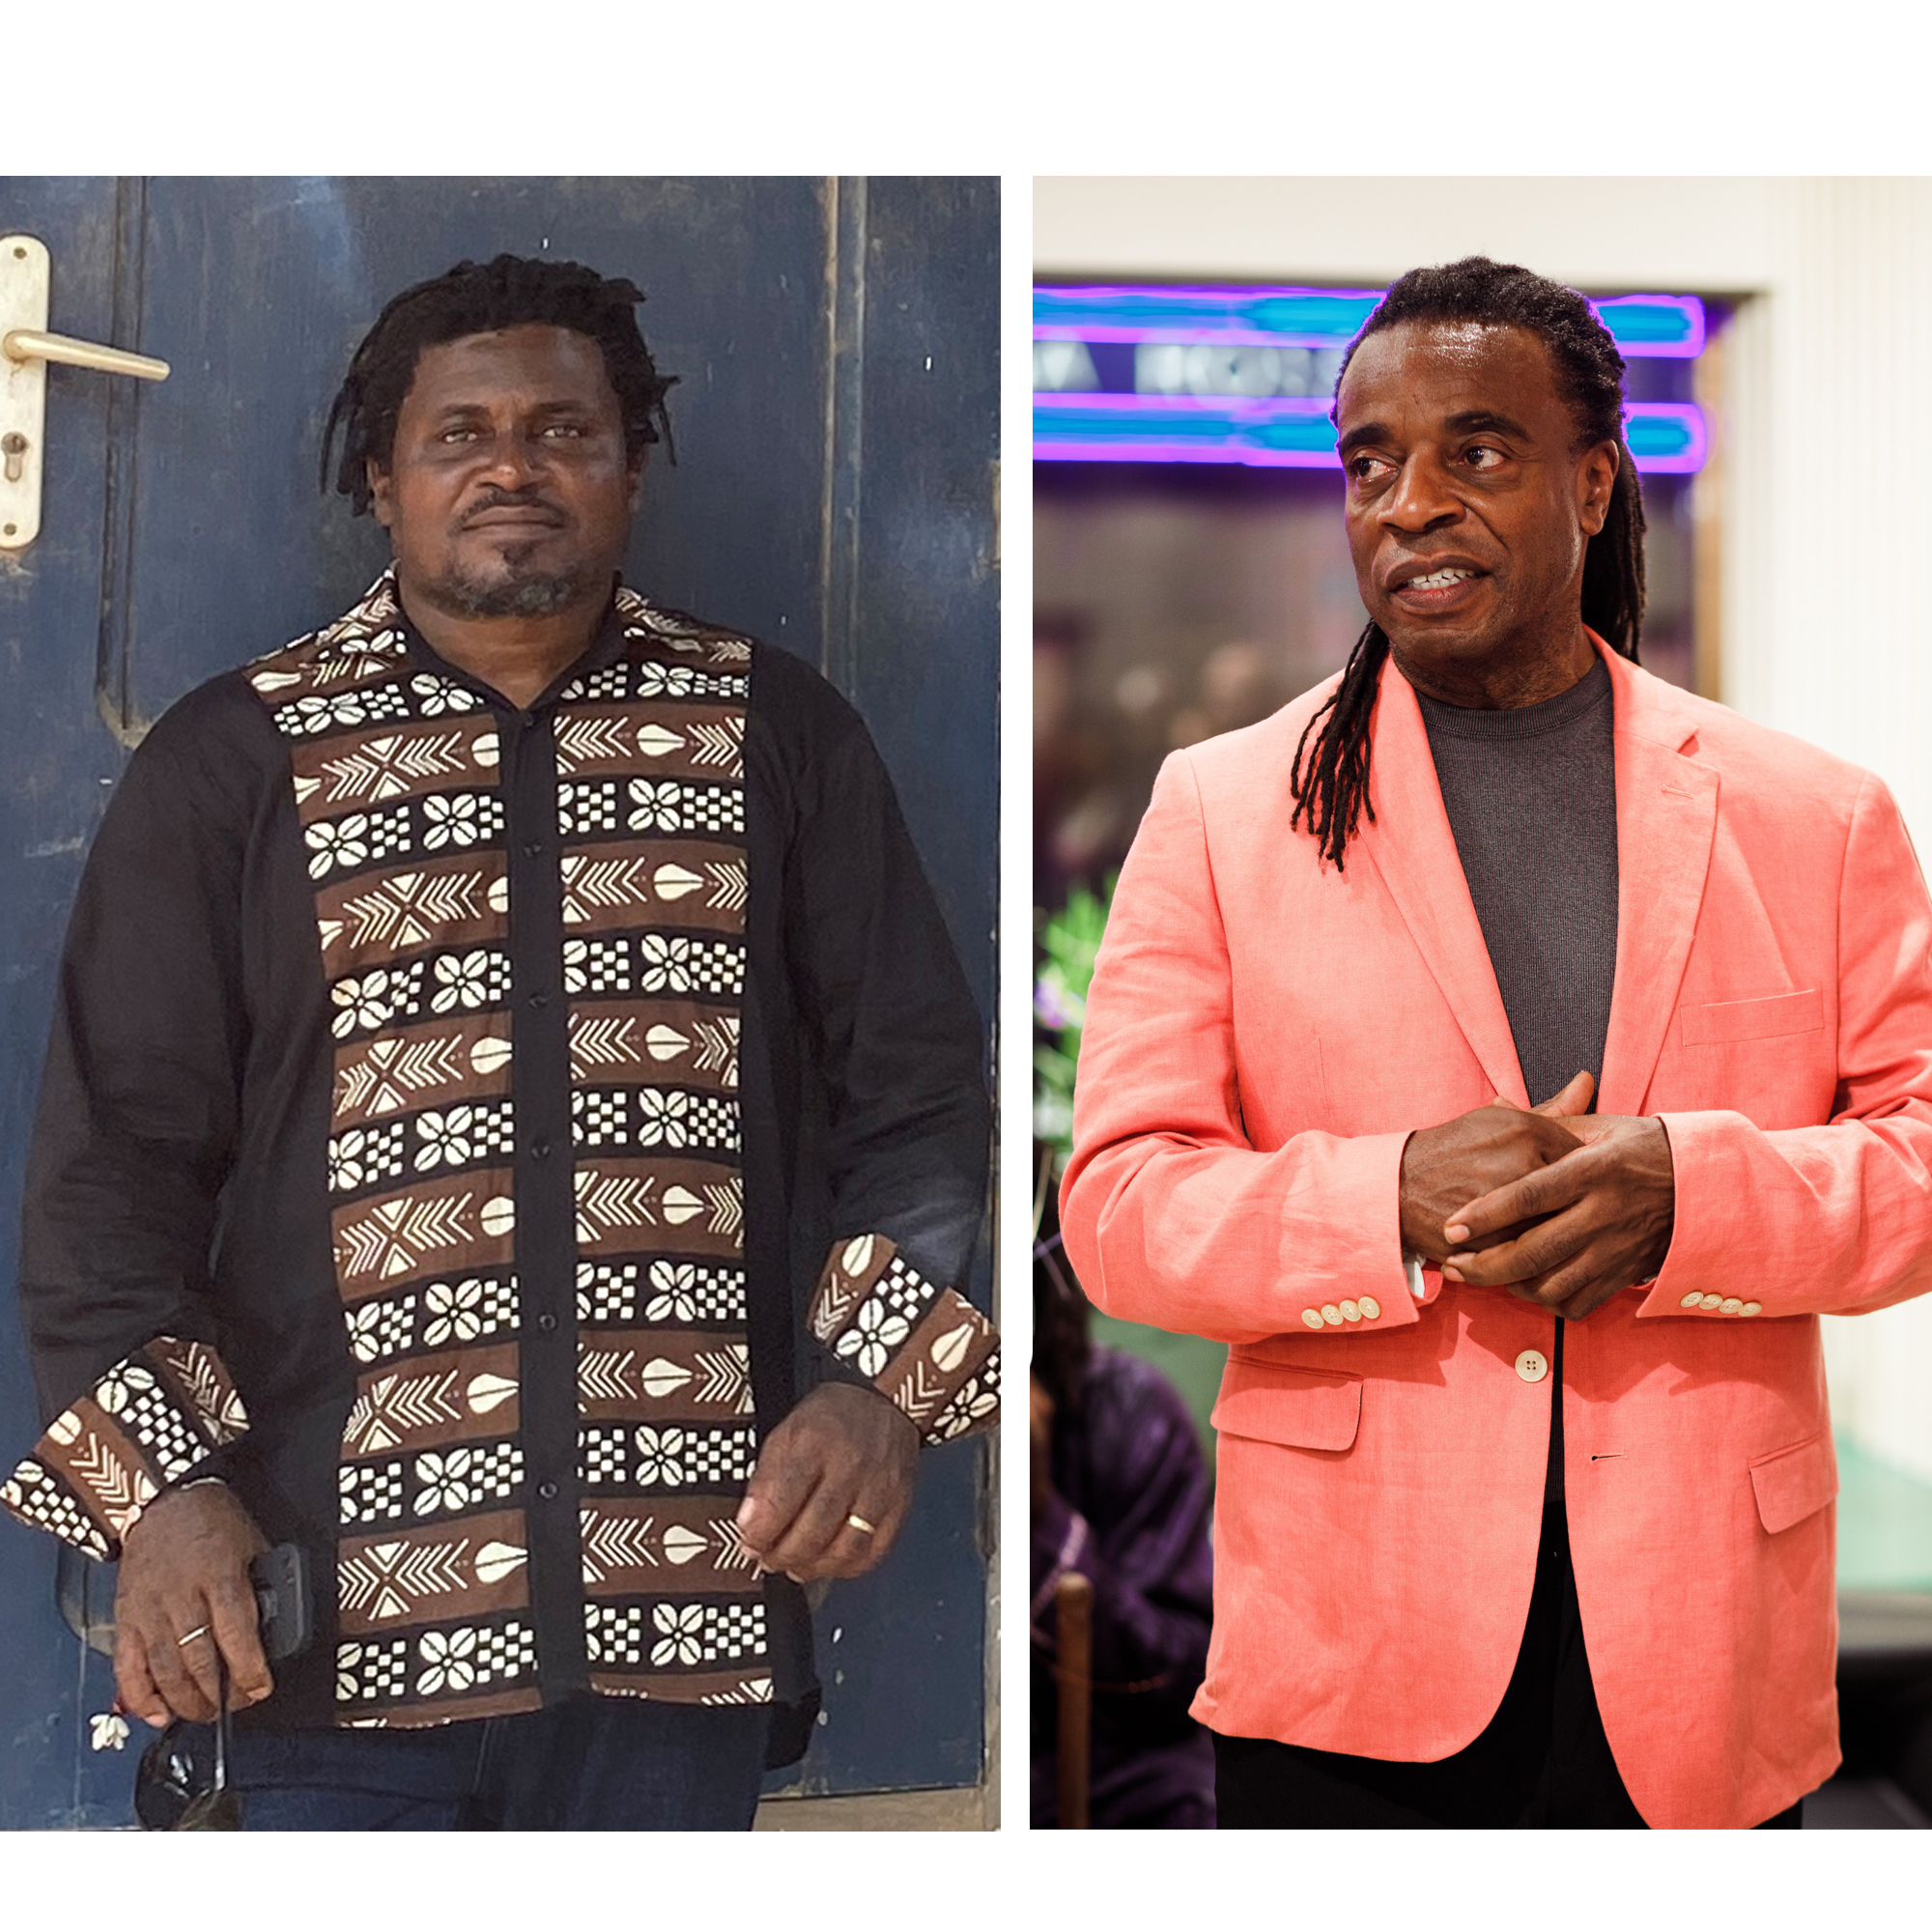 On left a Black man wearing printed, African-style shirt, on right a Black man wearing a salmon pink blazer